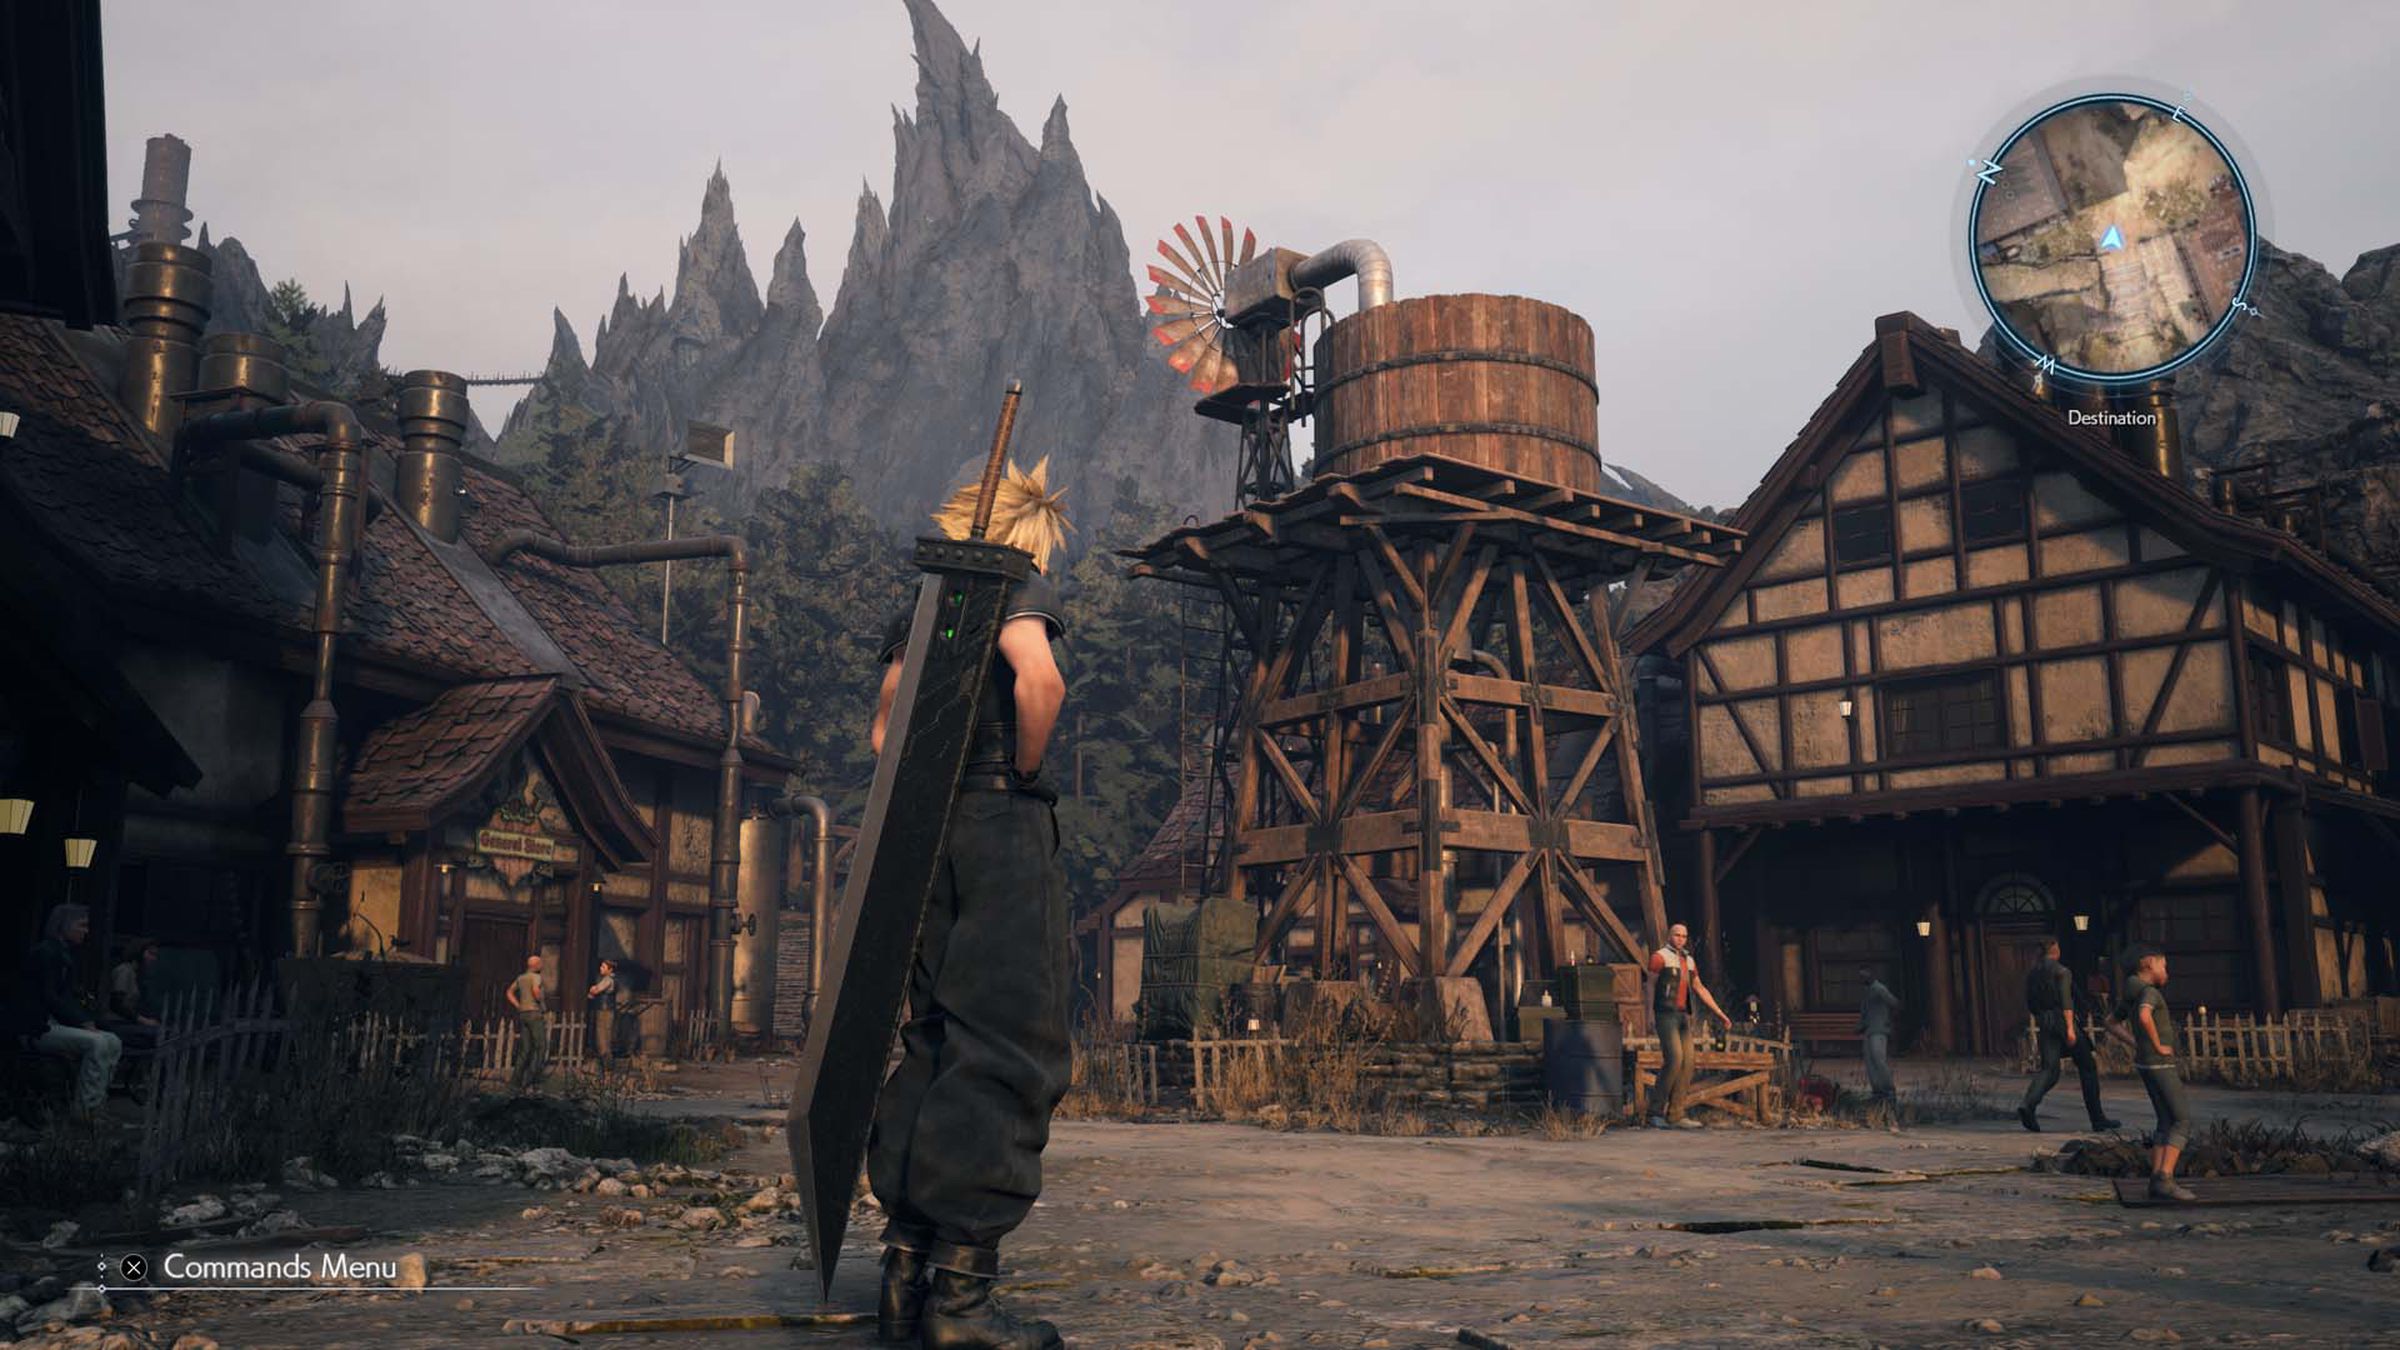 Screenshot from Final Fantasy VII Rebirth featuring Cloud standing in Nibelheim in the town square facing a large wooden water tower.